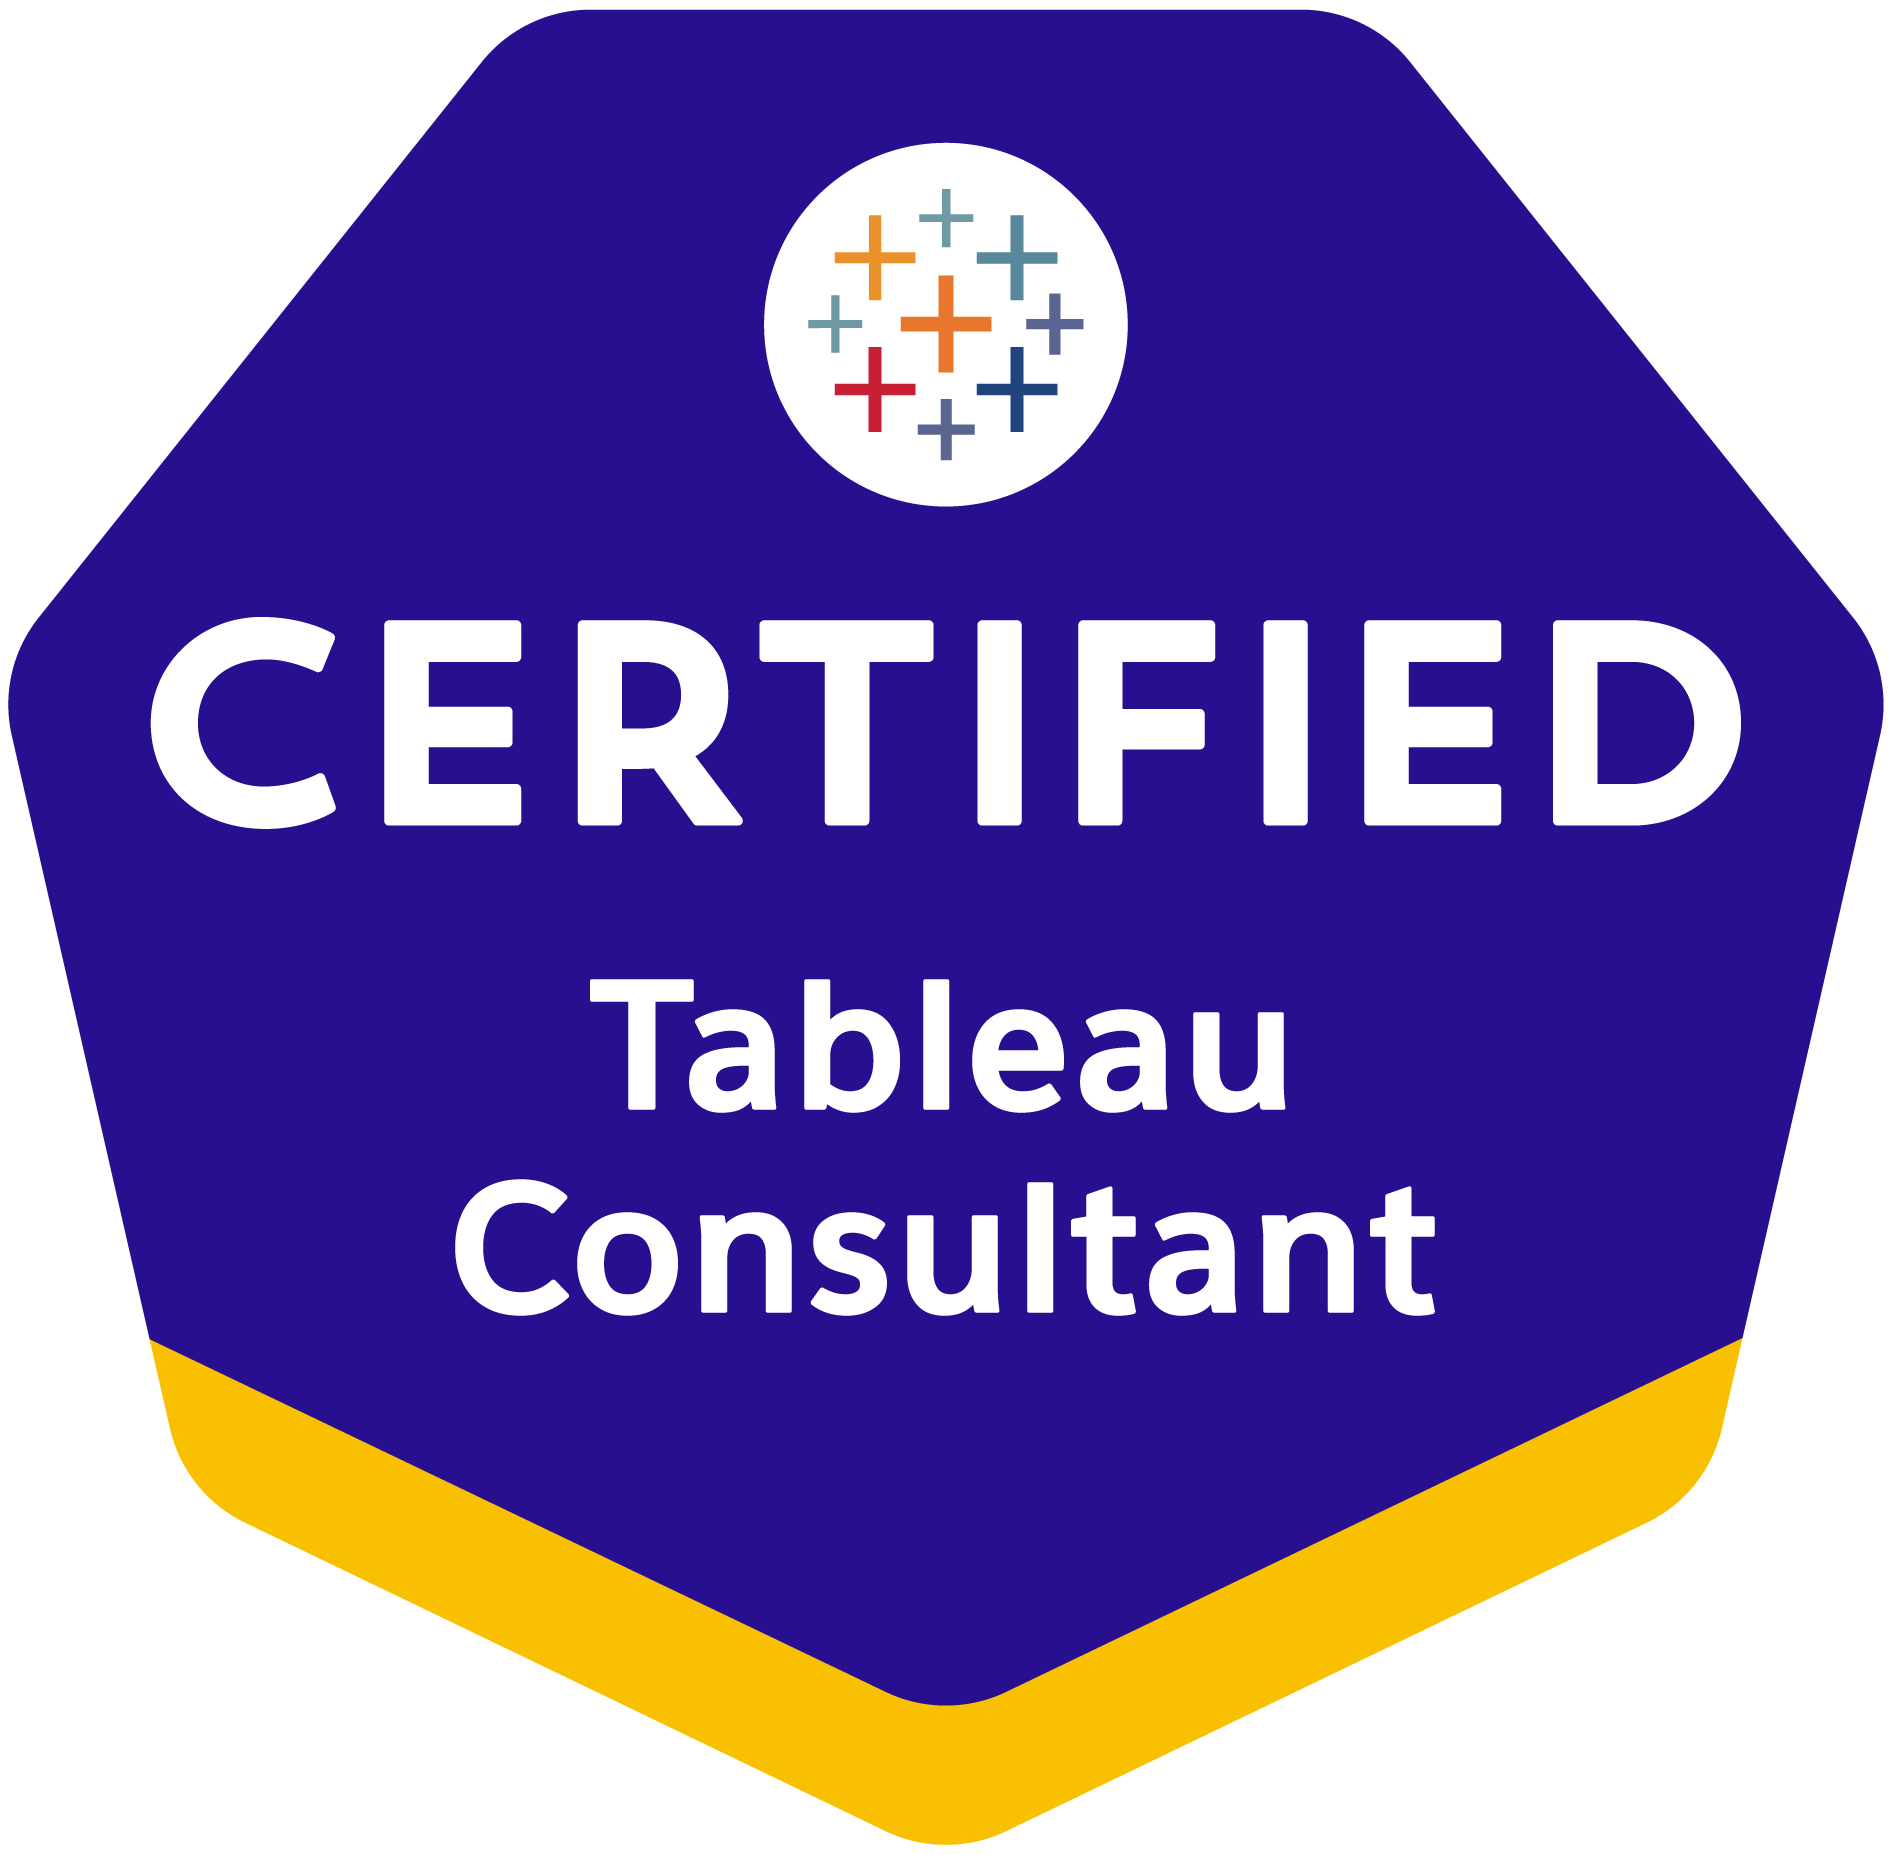 Navigate to Tableau Consultant